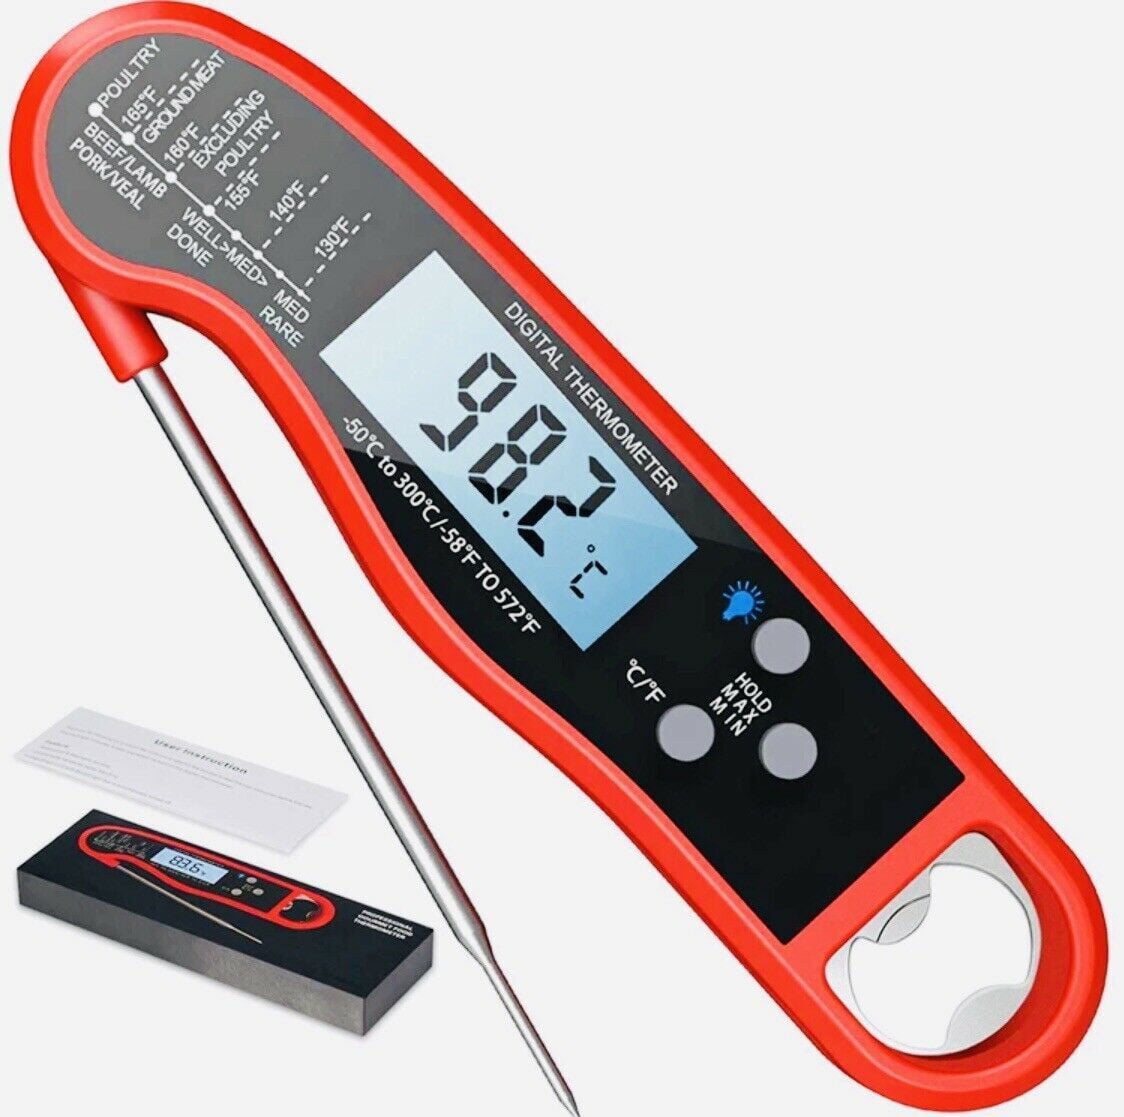 Kizen iP100 Instant Read Meat Thermometer - Waterproof Ambidextrous Thermometer with Backlight & Calibration Digital Food Thermometer for Kitchen